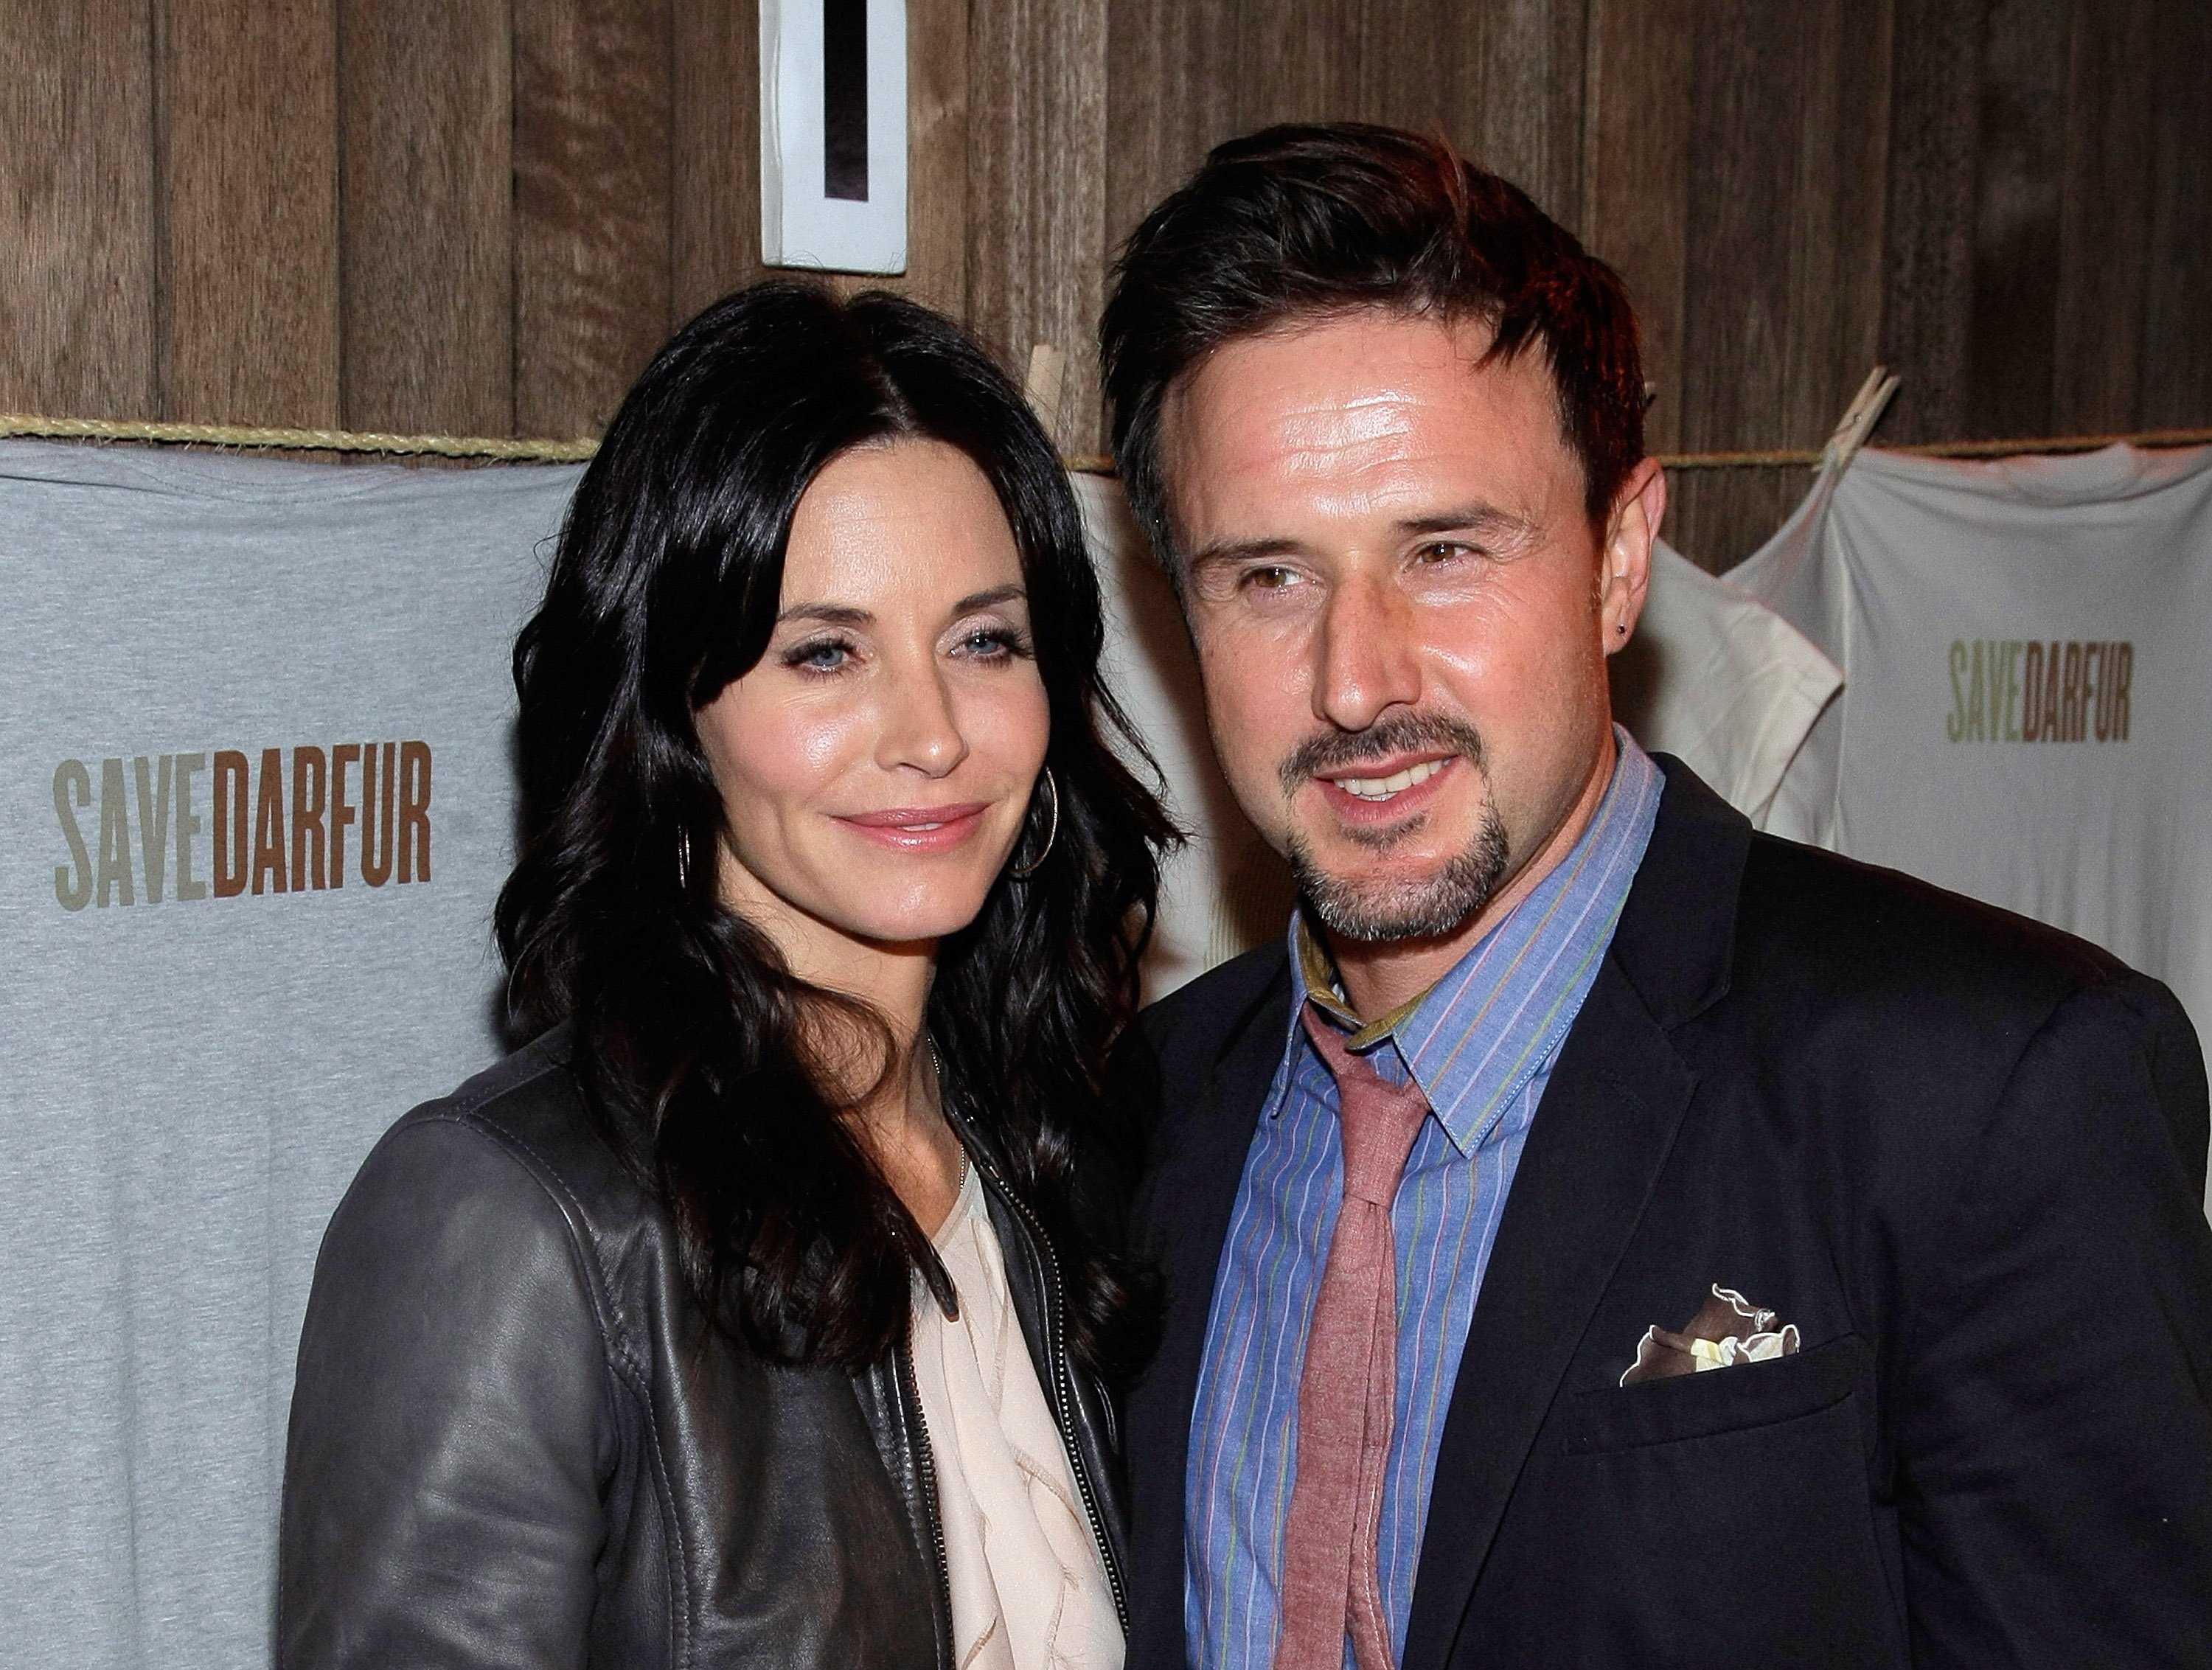 Courteney Cox and David Arquette at the launch of Propr's Darfur Shirt at Propr Store, 2009, Venice, California. | Photo: Getty Images